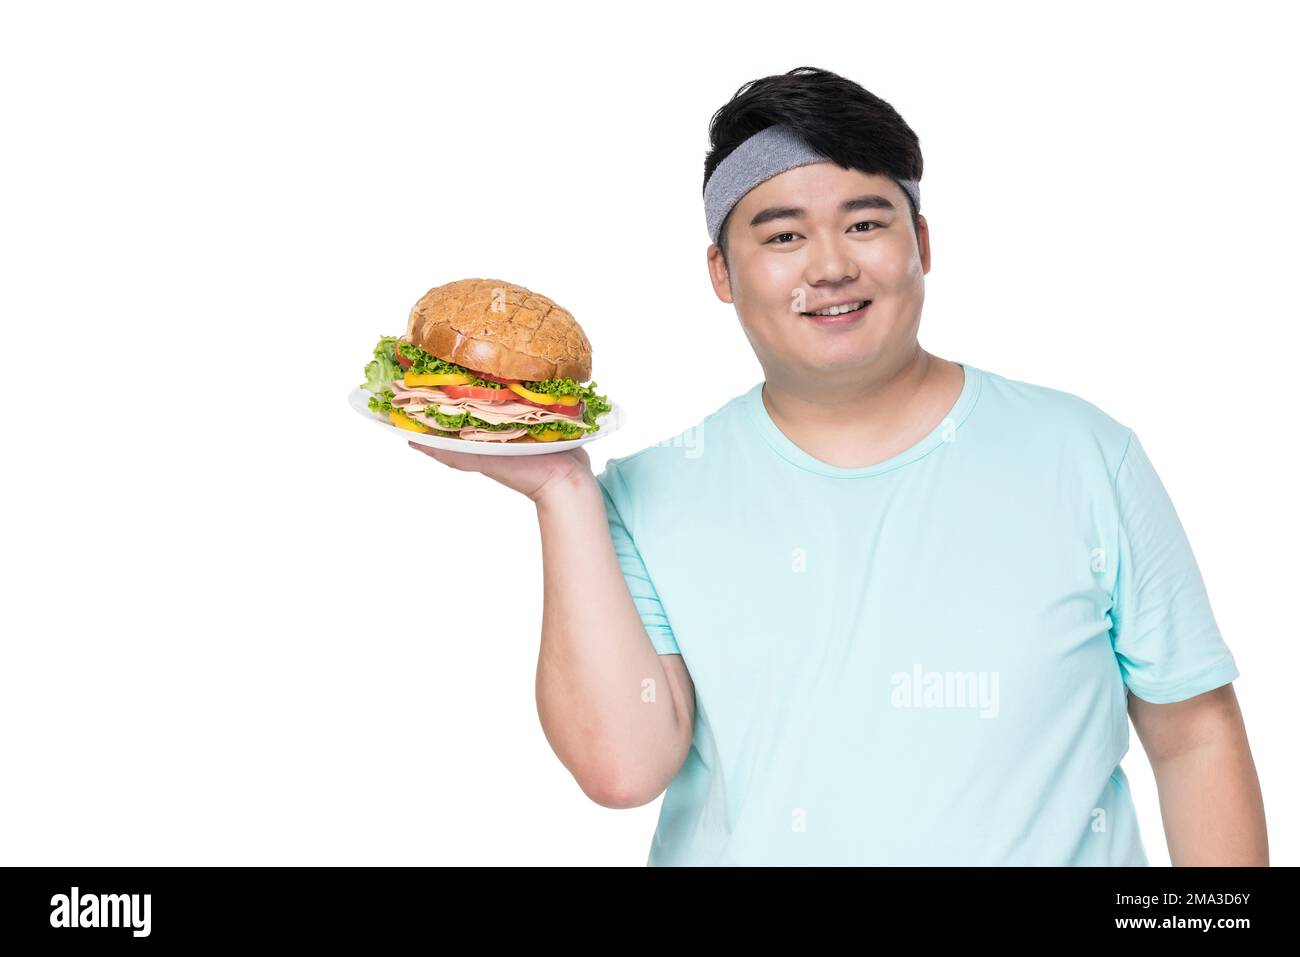 Fat young man holding a burger Stock Photo